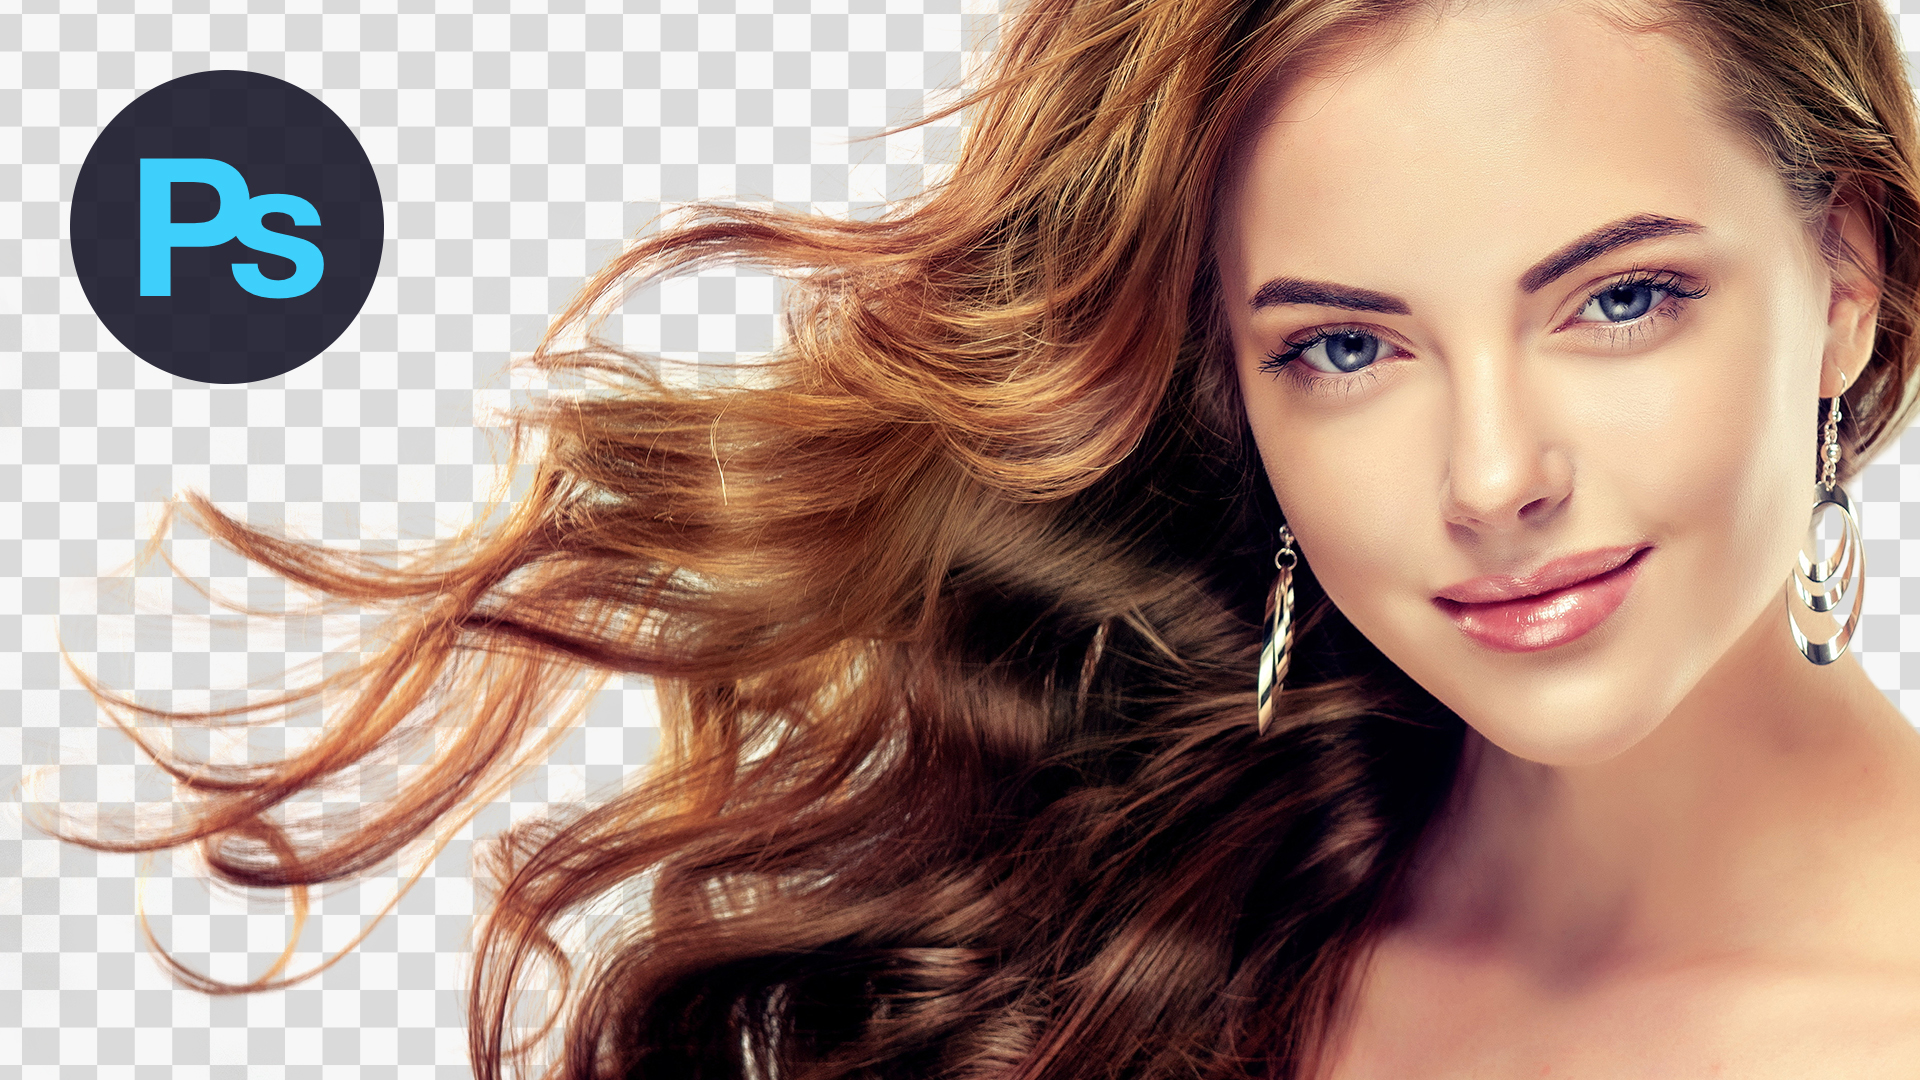 How to Cut Out Hair in Adobe Photoshop